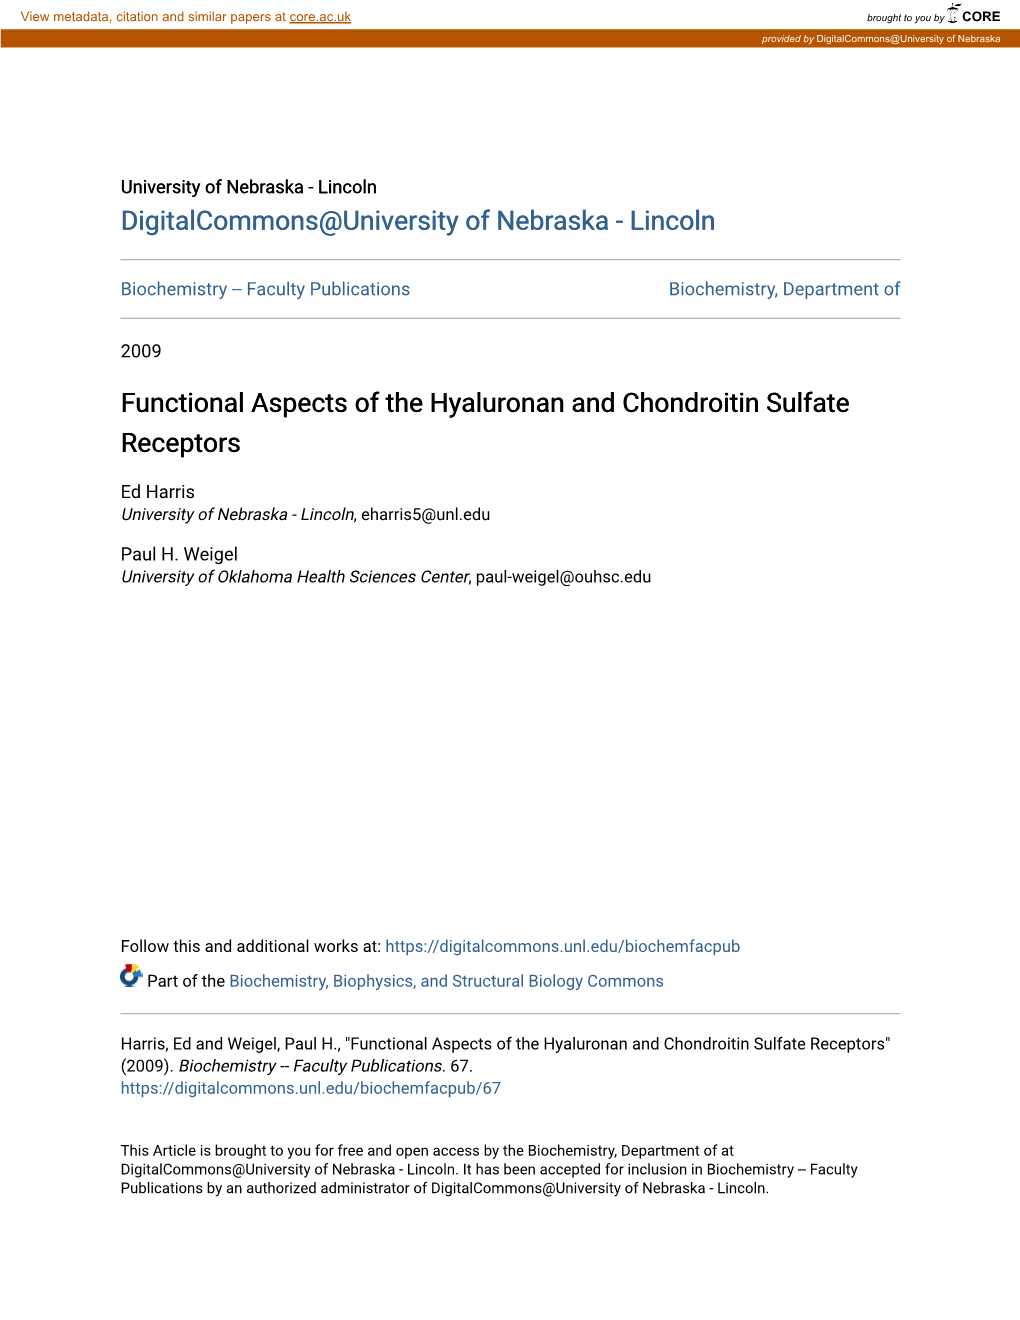 Functional Aspects of the Hyaluronan and Chondroitin Sulfate Receptors